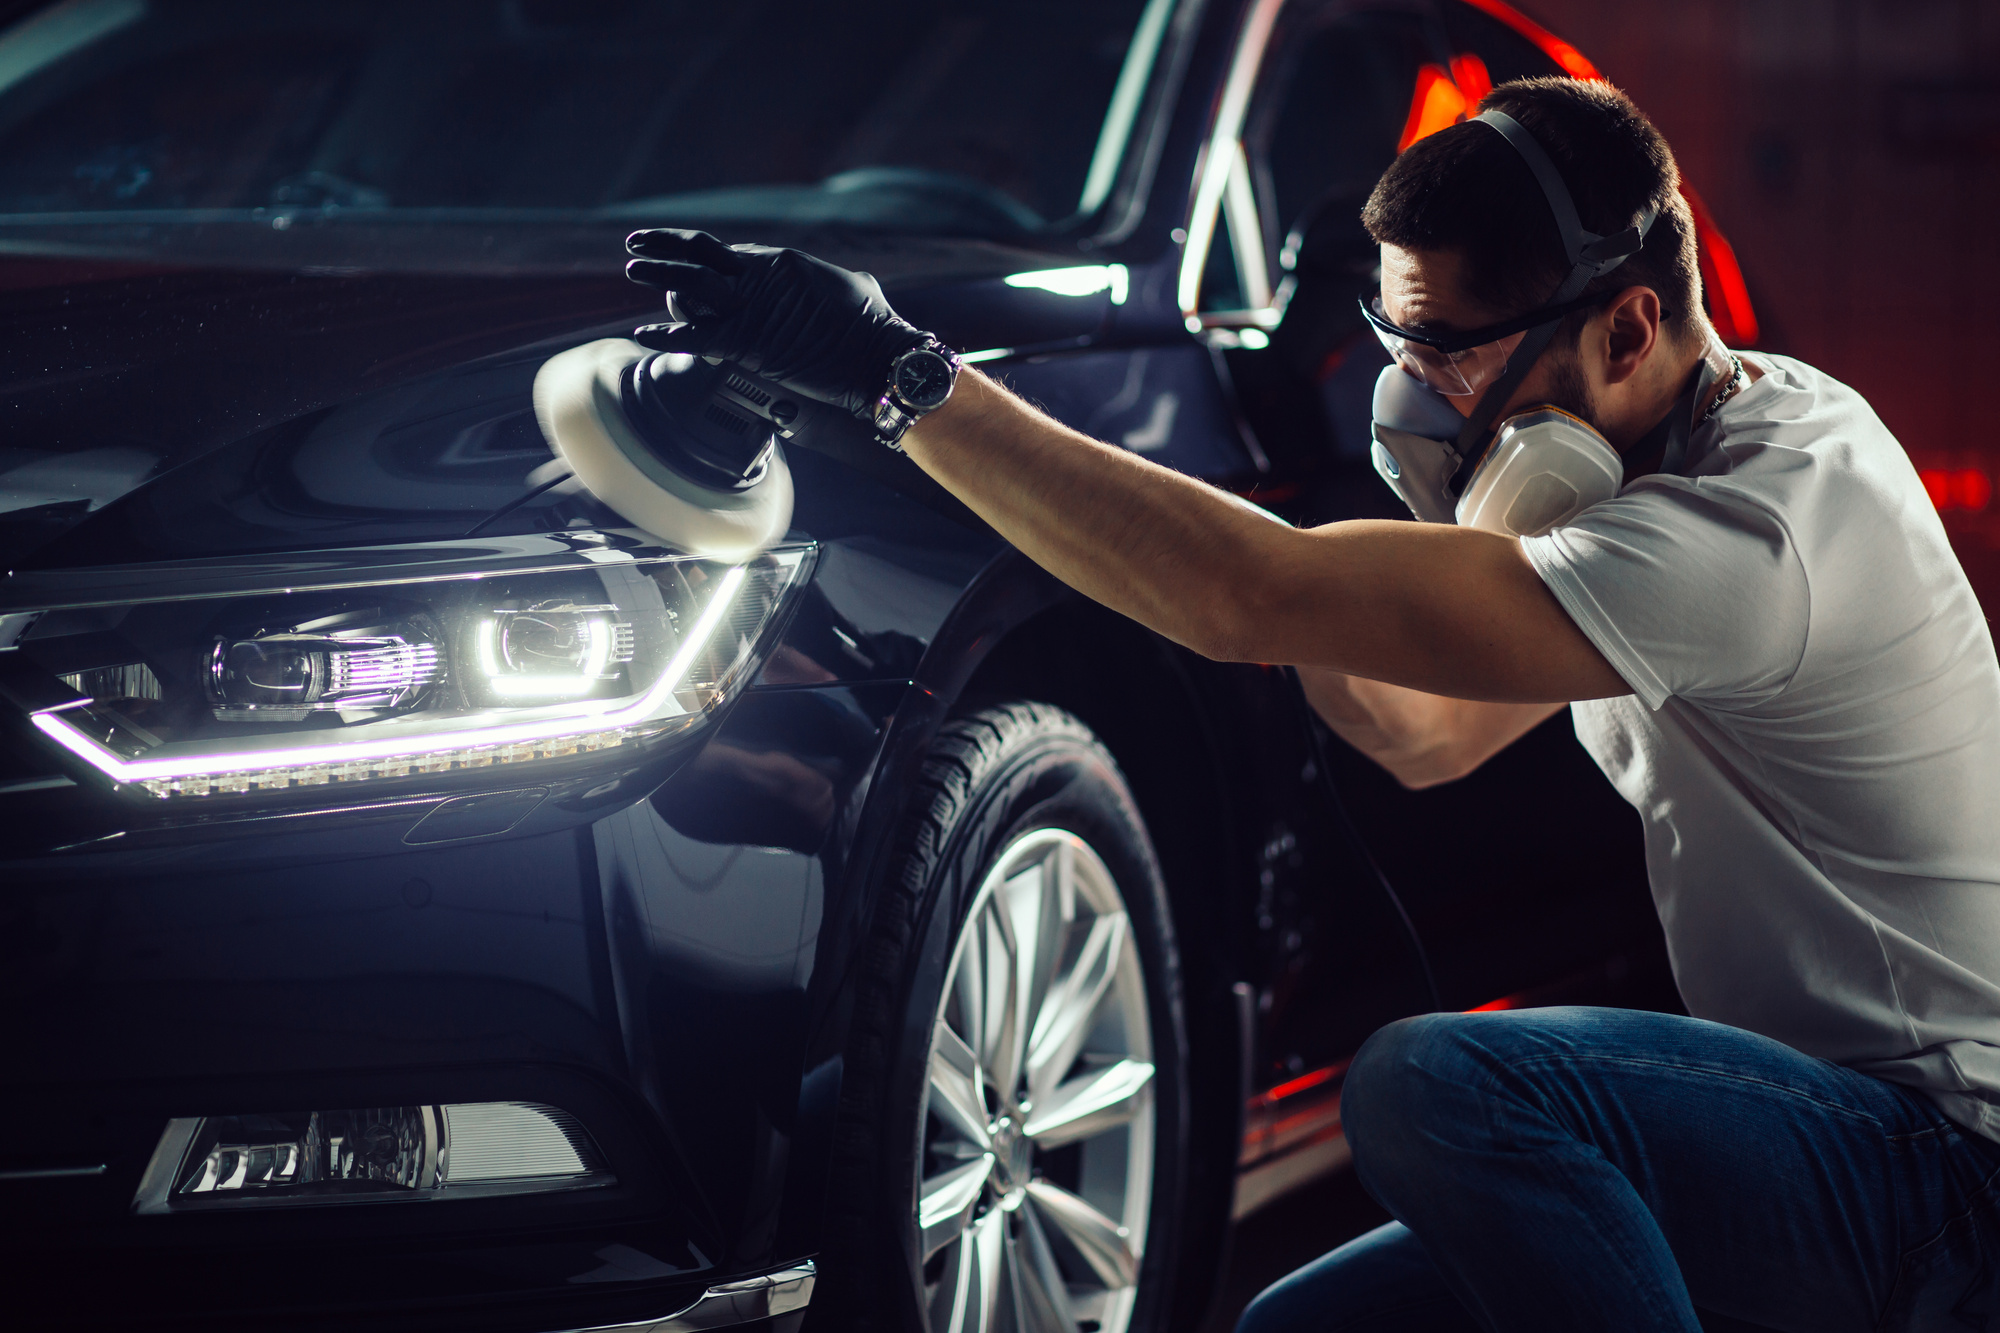 It's All in the Details: 8 Important Reasons to Consider Car Detailing